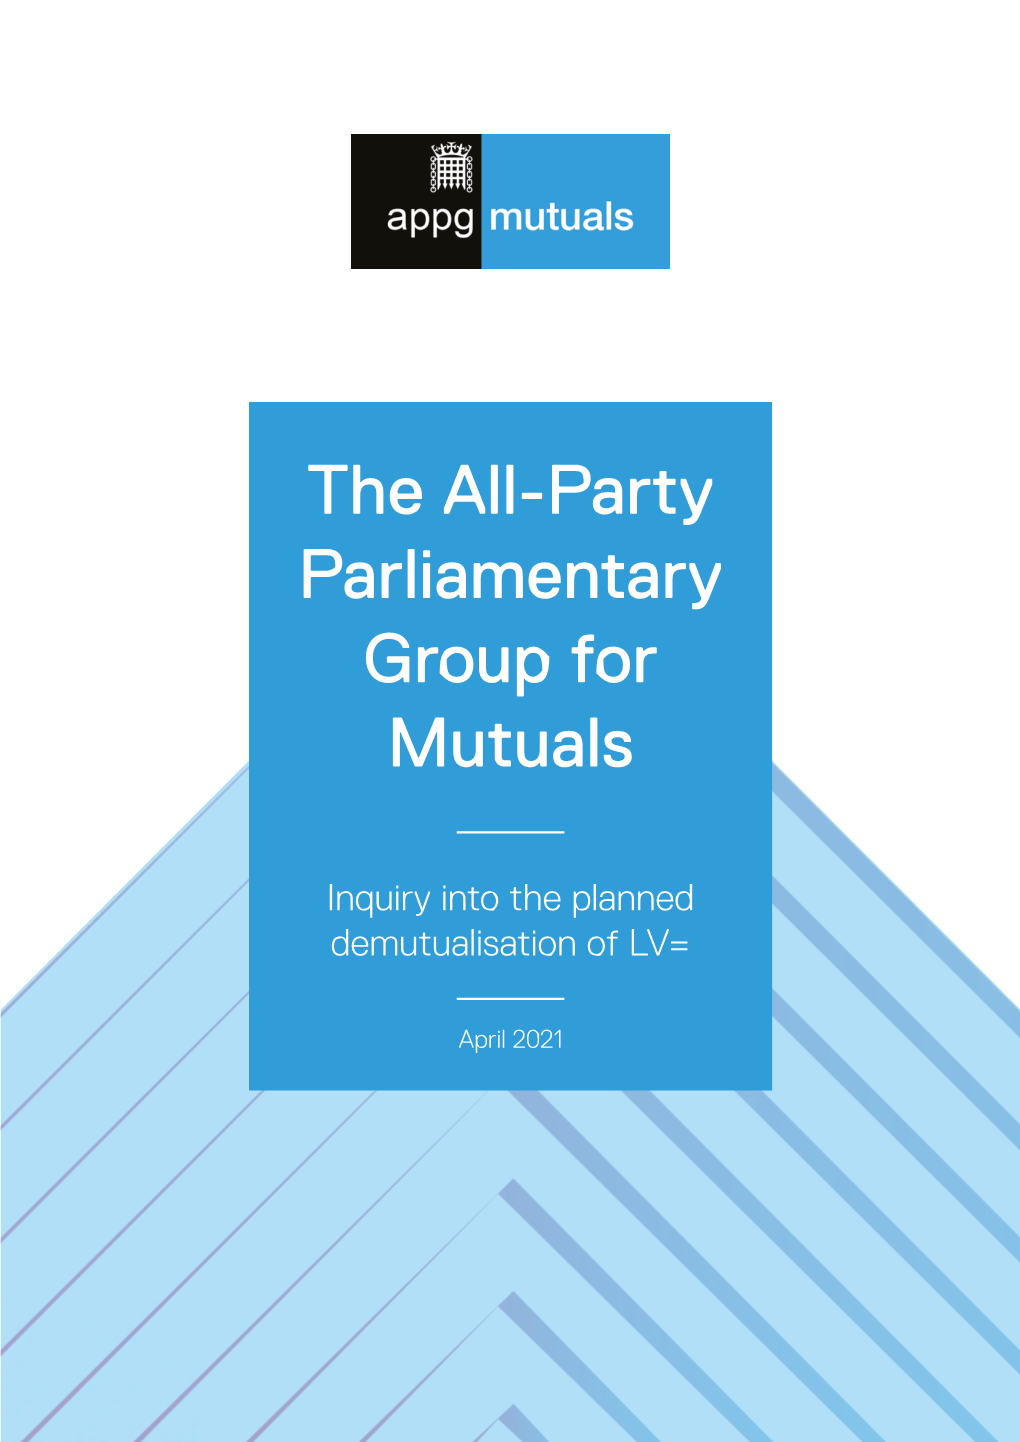 The All-Party Parliamentary Group for Mutuals